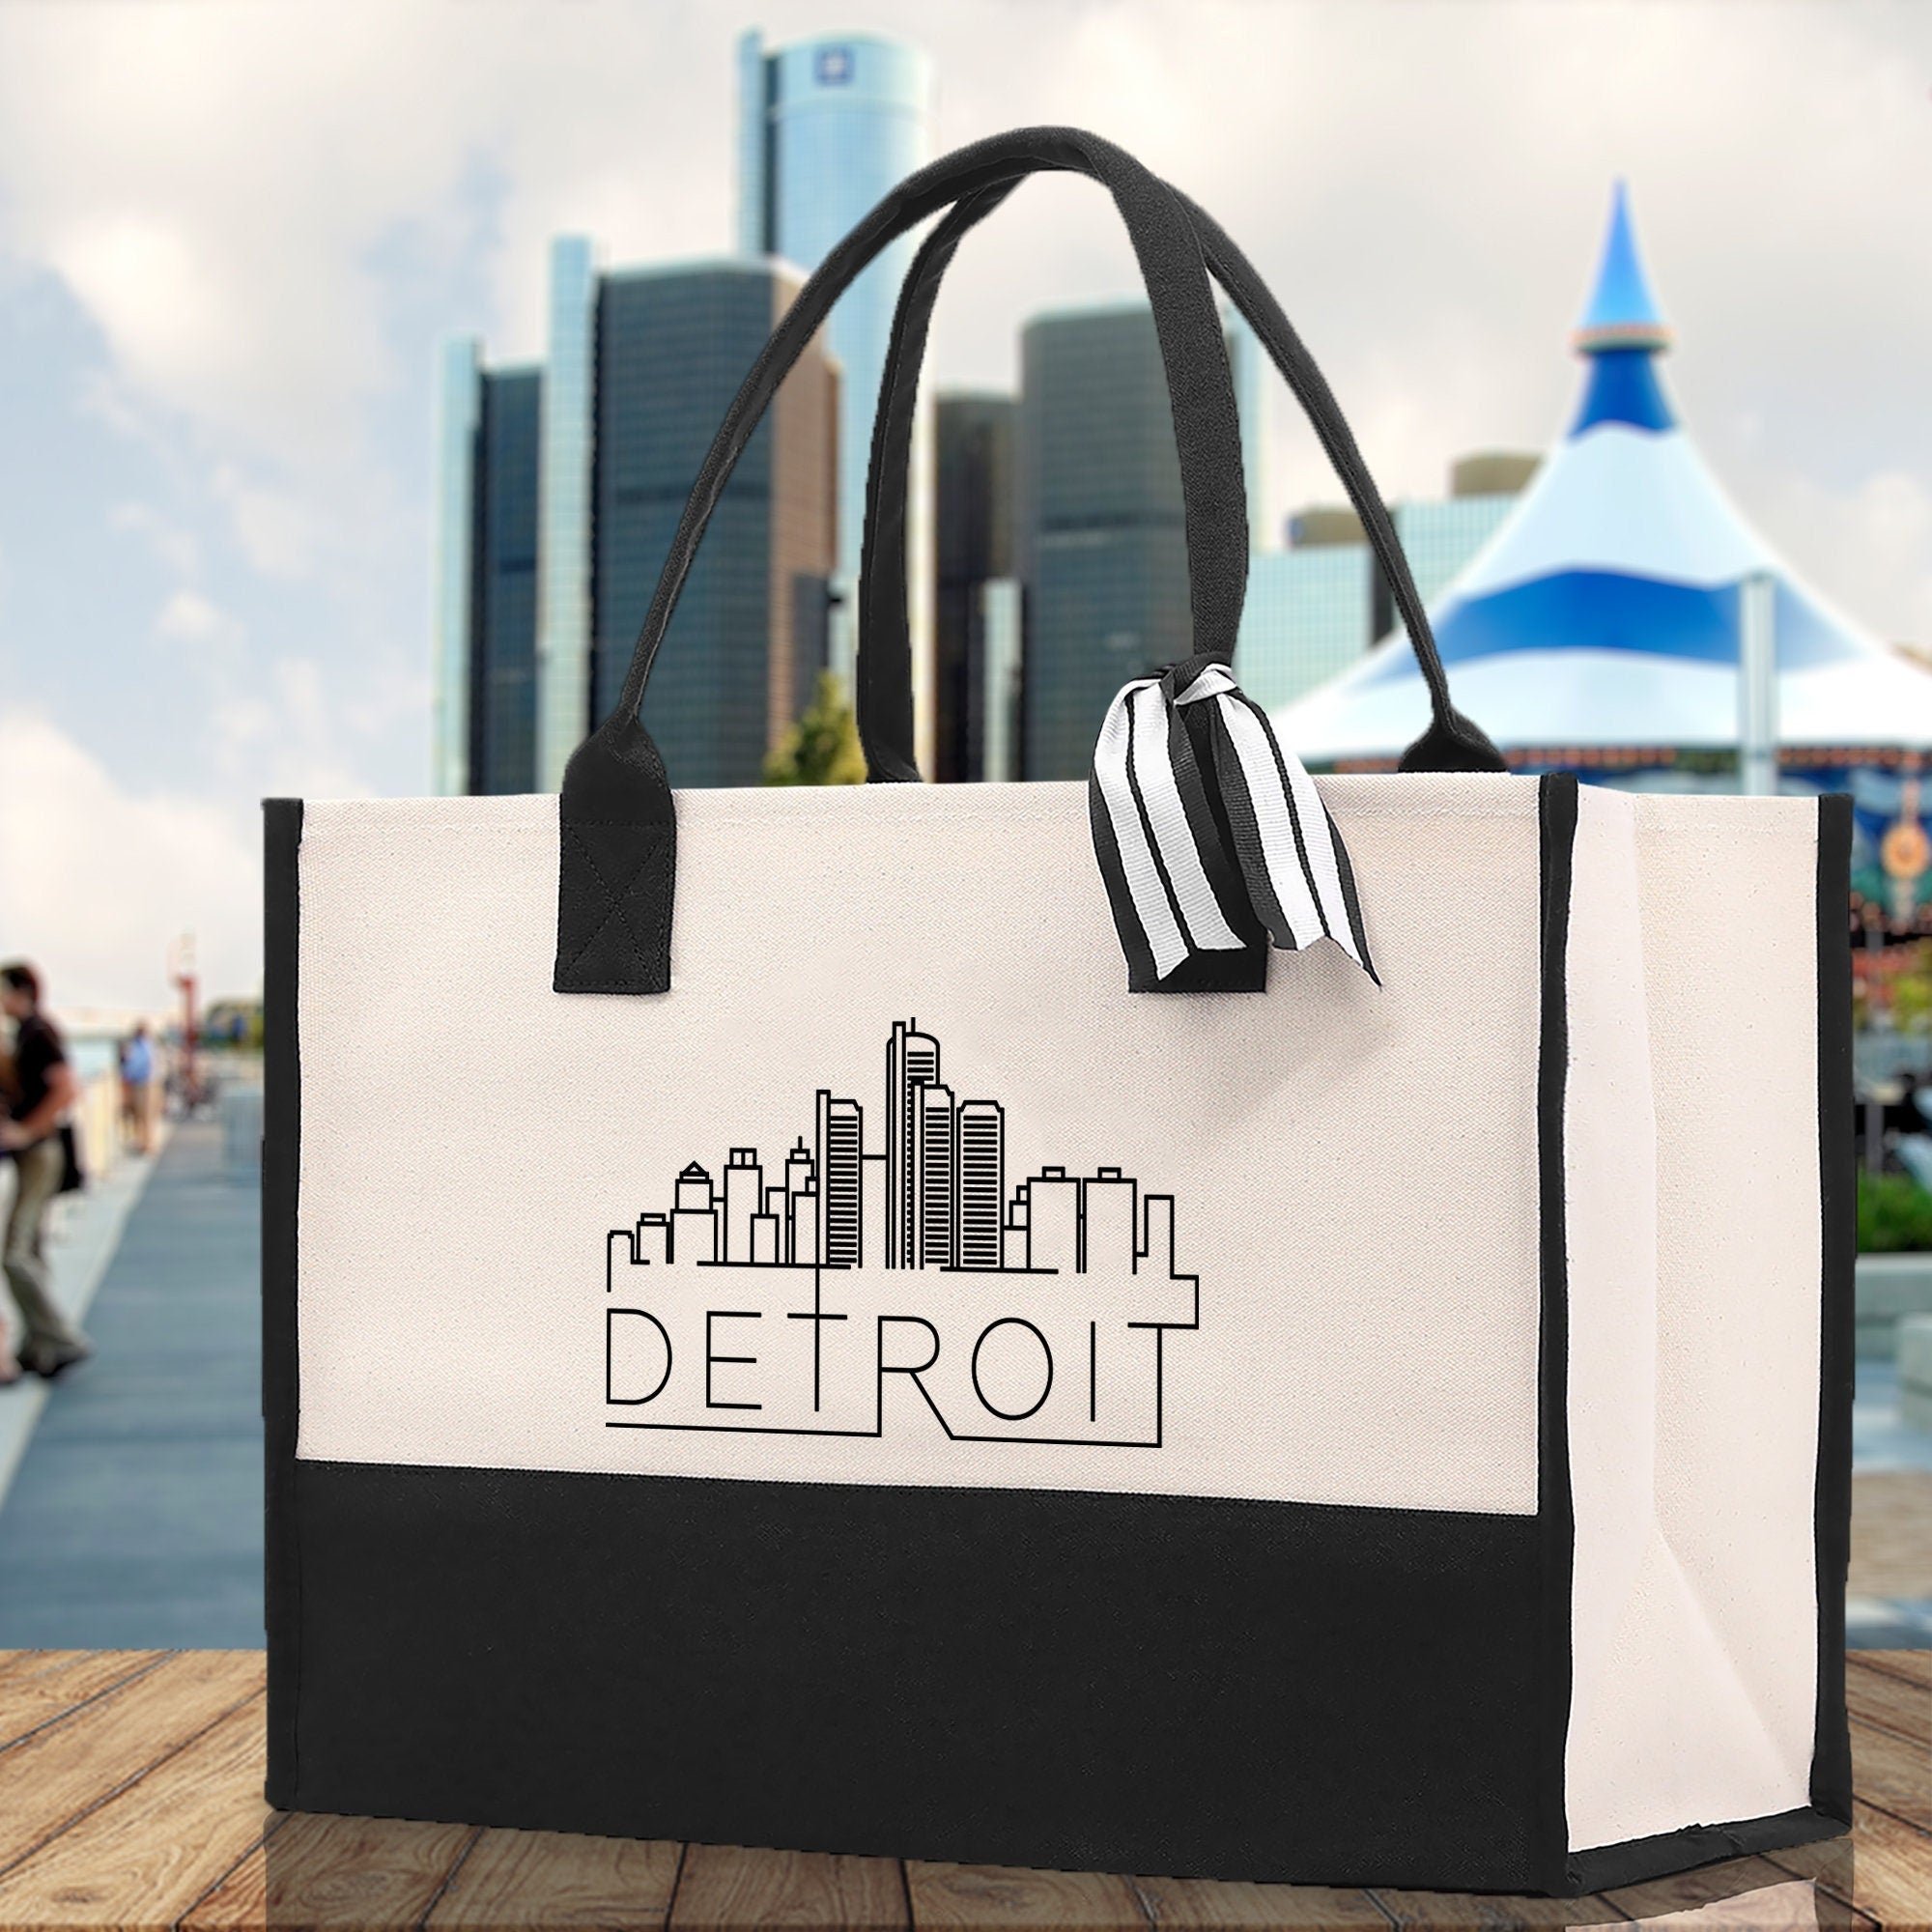 Detroit Cotton Canvas Tote Bag Travel Vacation Tote Employee and Client Gift Wedding Favor Birthday Welcome Tote Bag Bridesmaid Gift